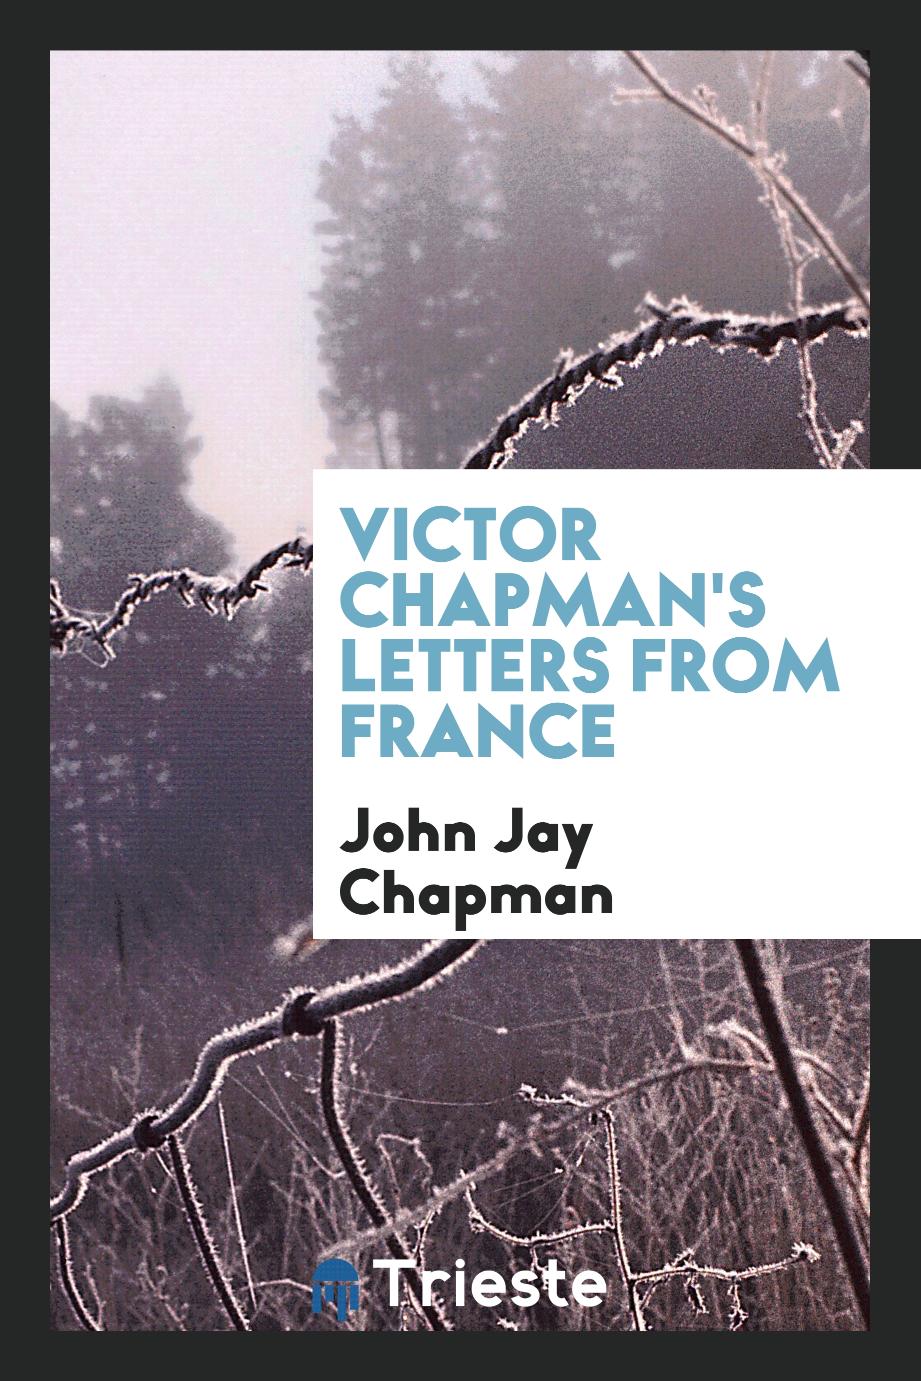 Victor Chapman's letters from France